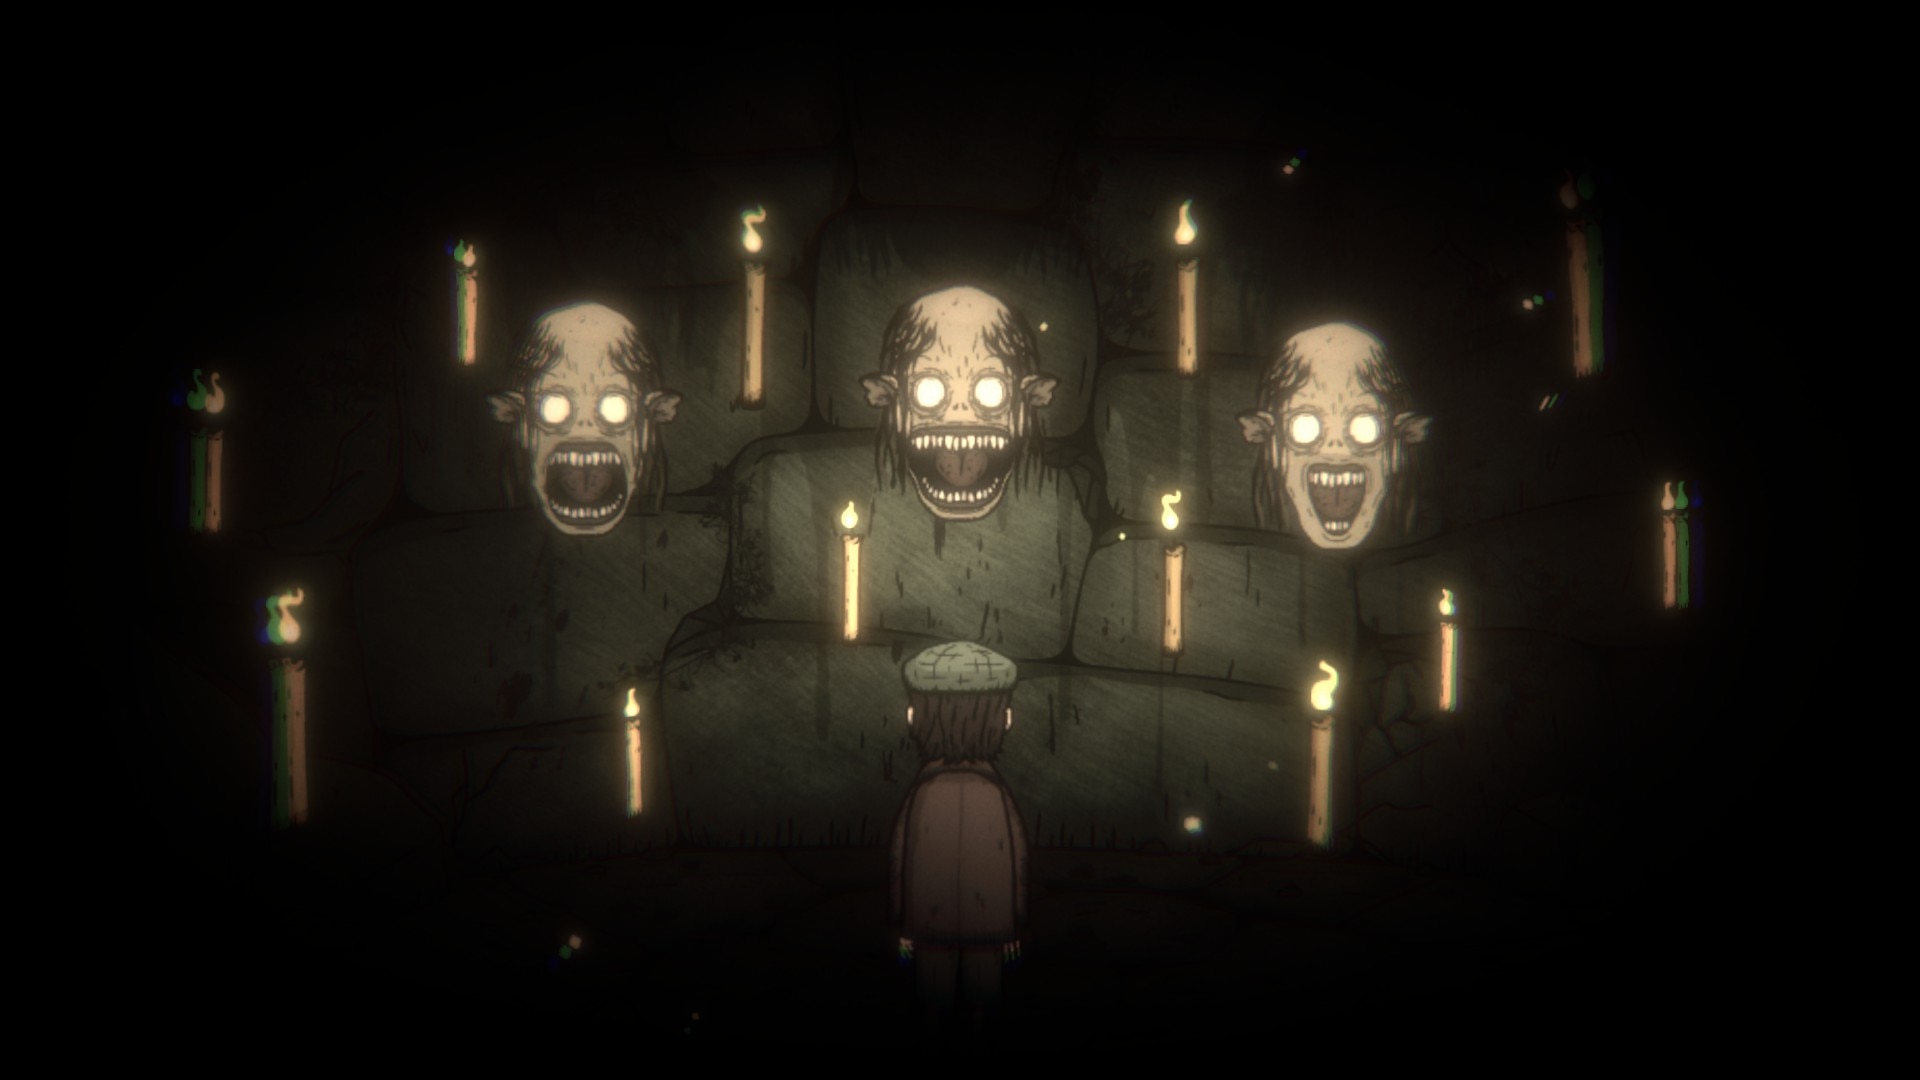 Creepy Tale: Some Other Place Free Download 4 - gamesunlock.com